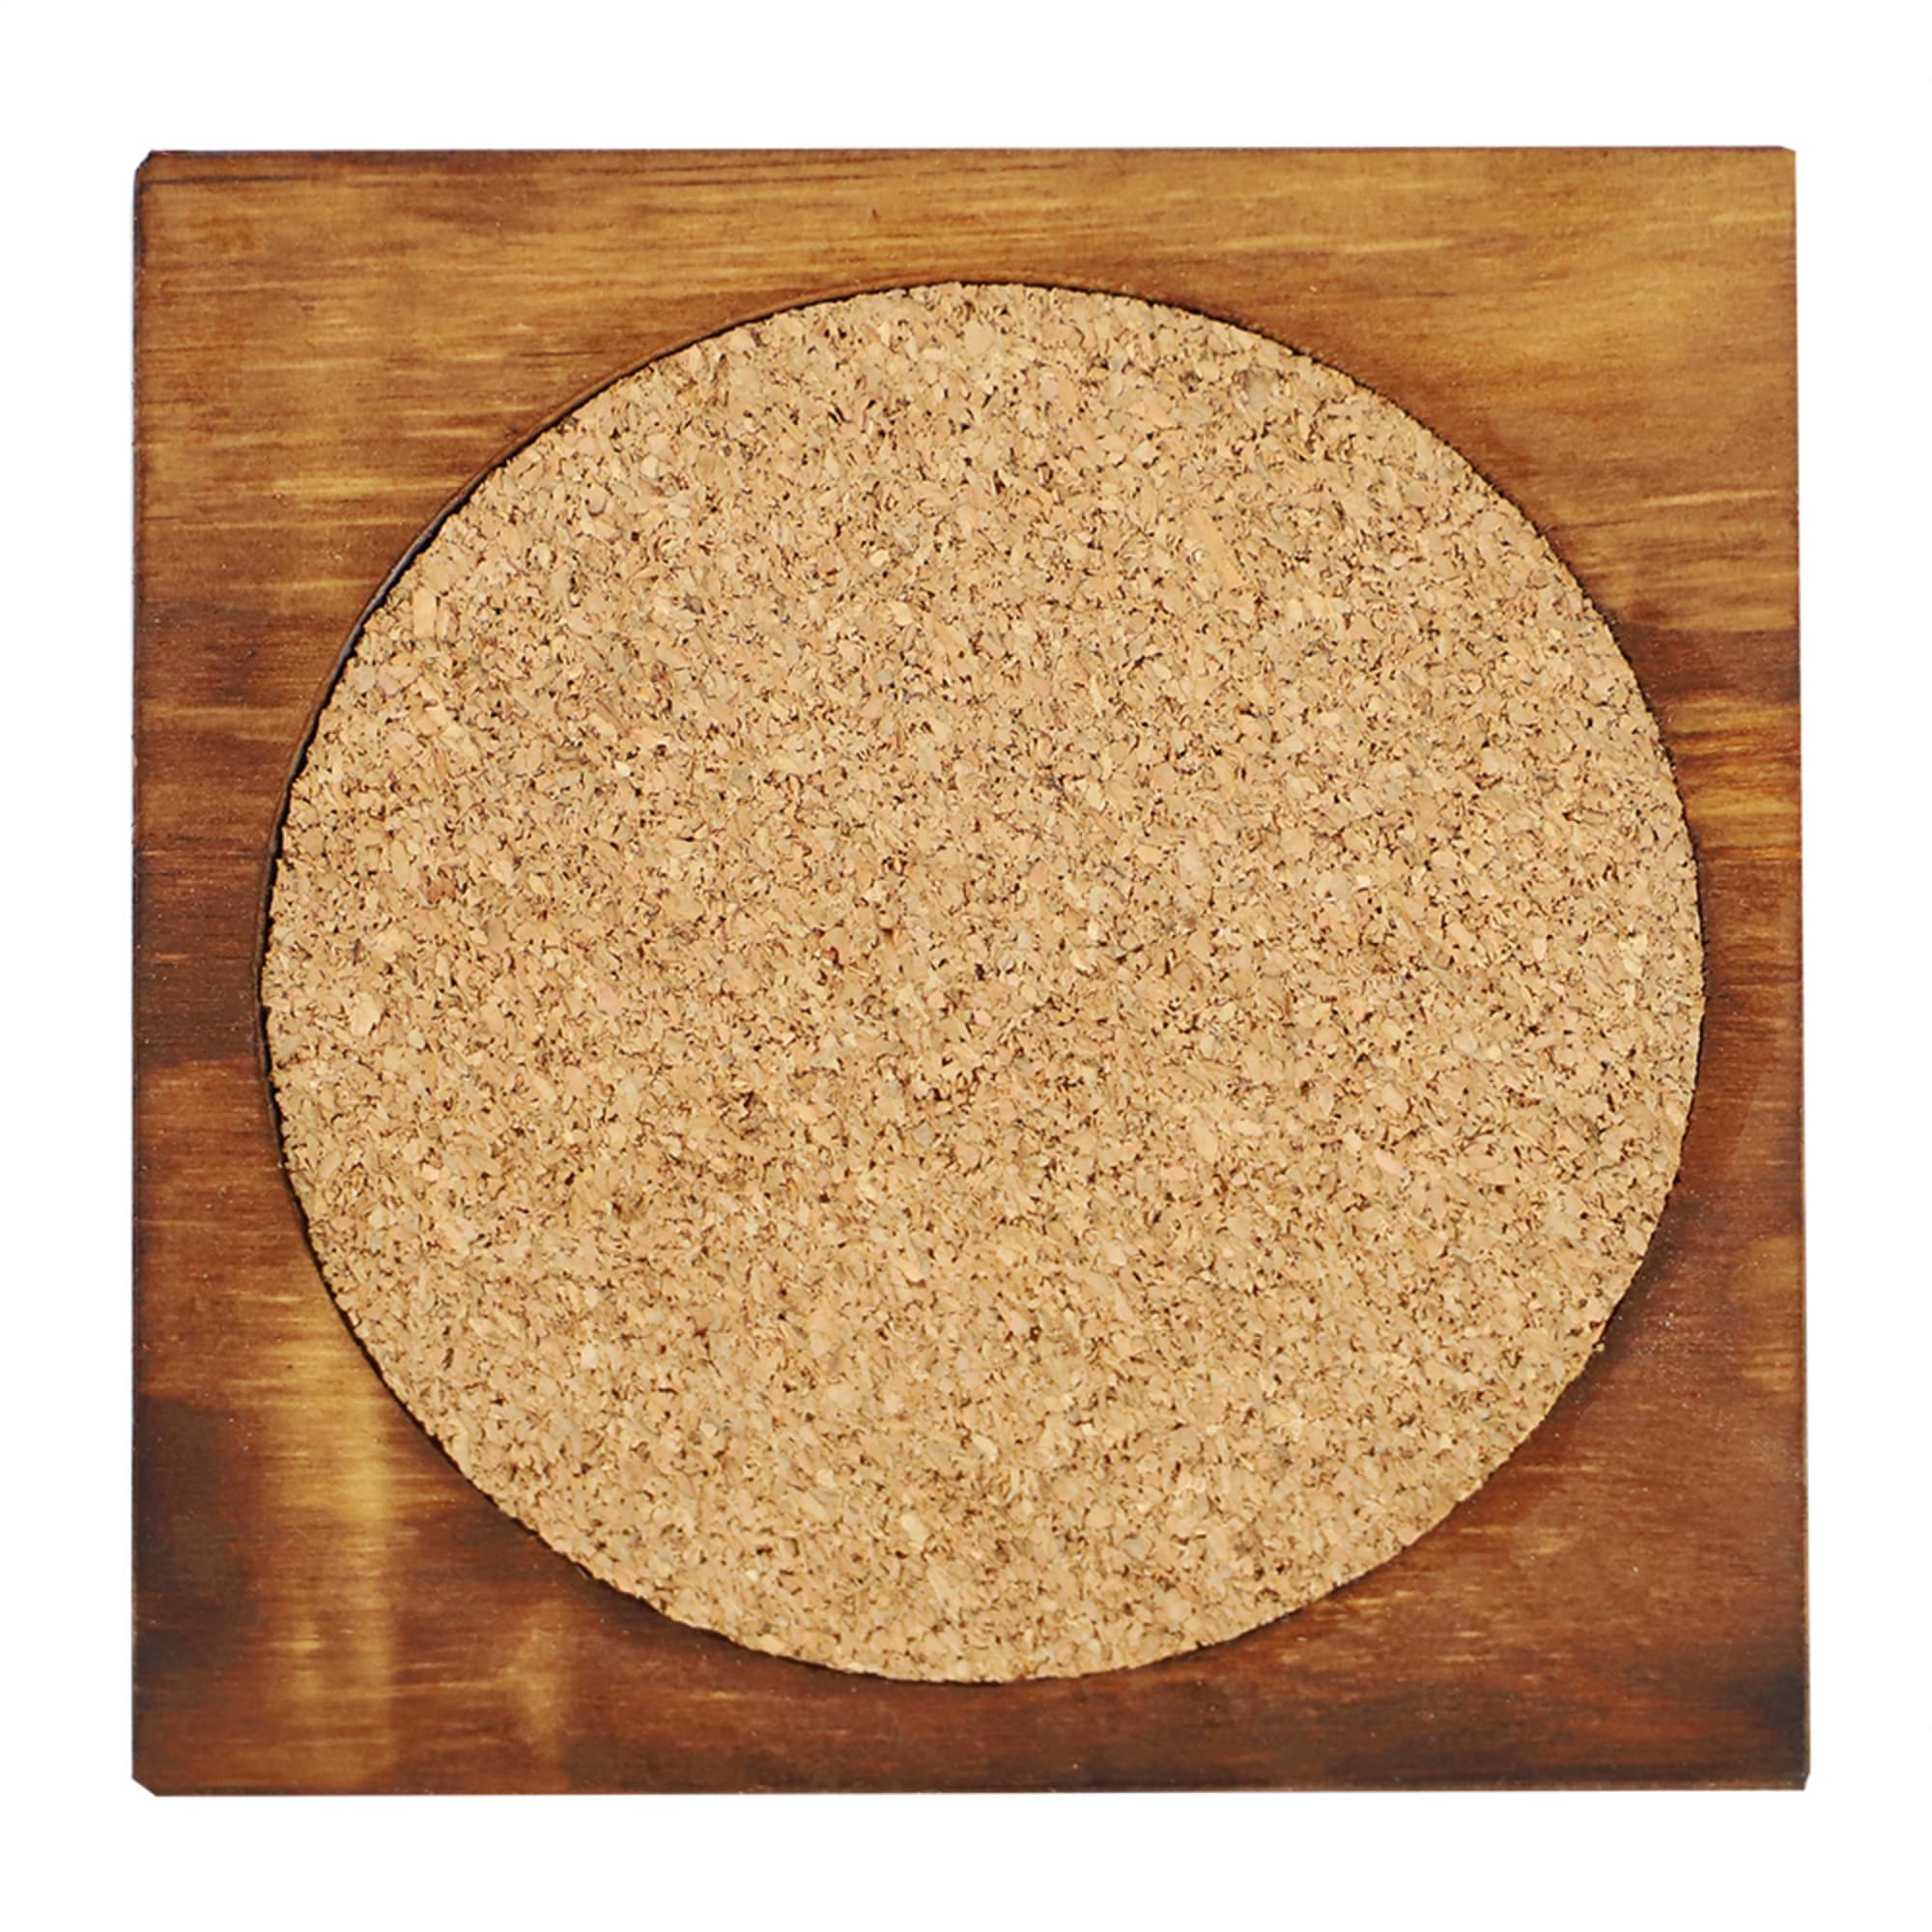 Home Basics Pine Wood Square Coasters with Absorbent Cork Insert, (Set of 6), and Holder $6.00 EACH, CASE PACK OF 12